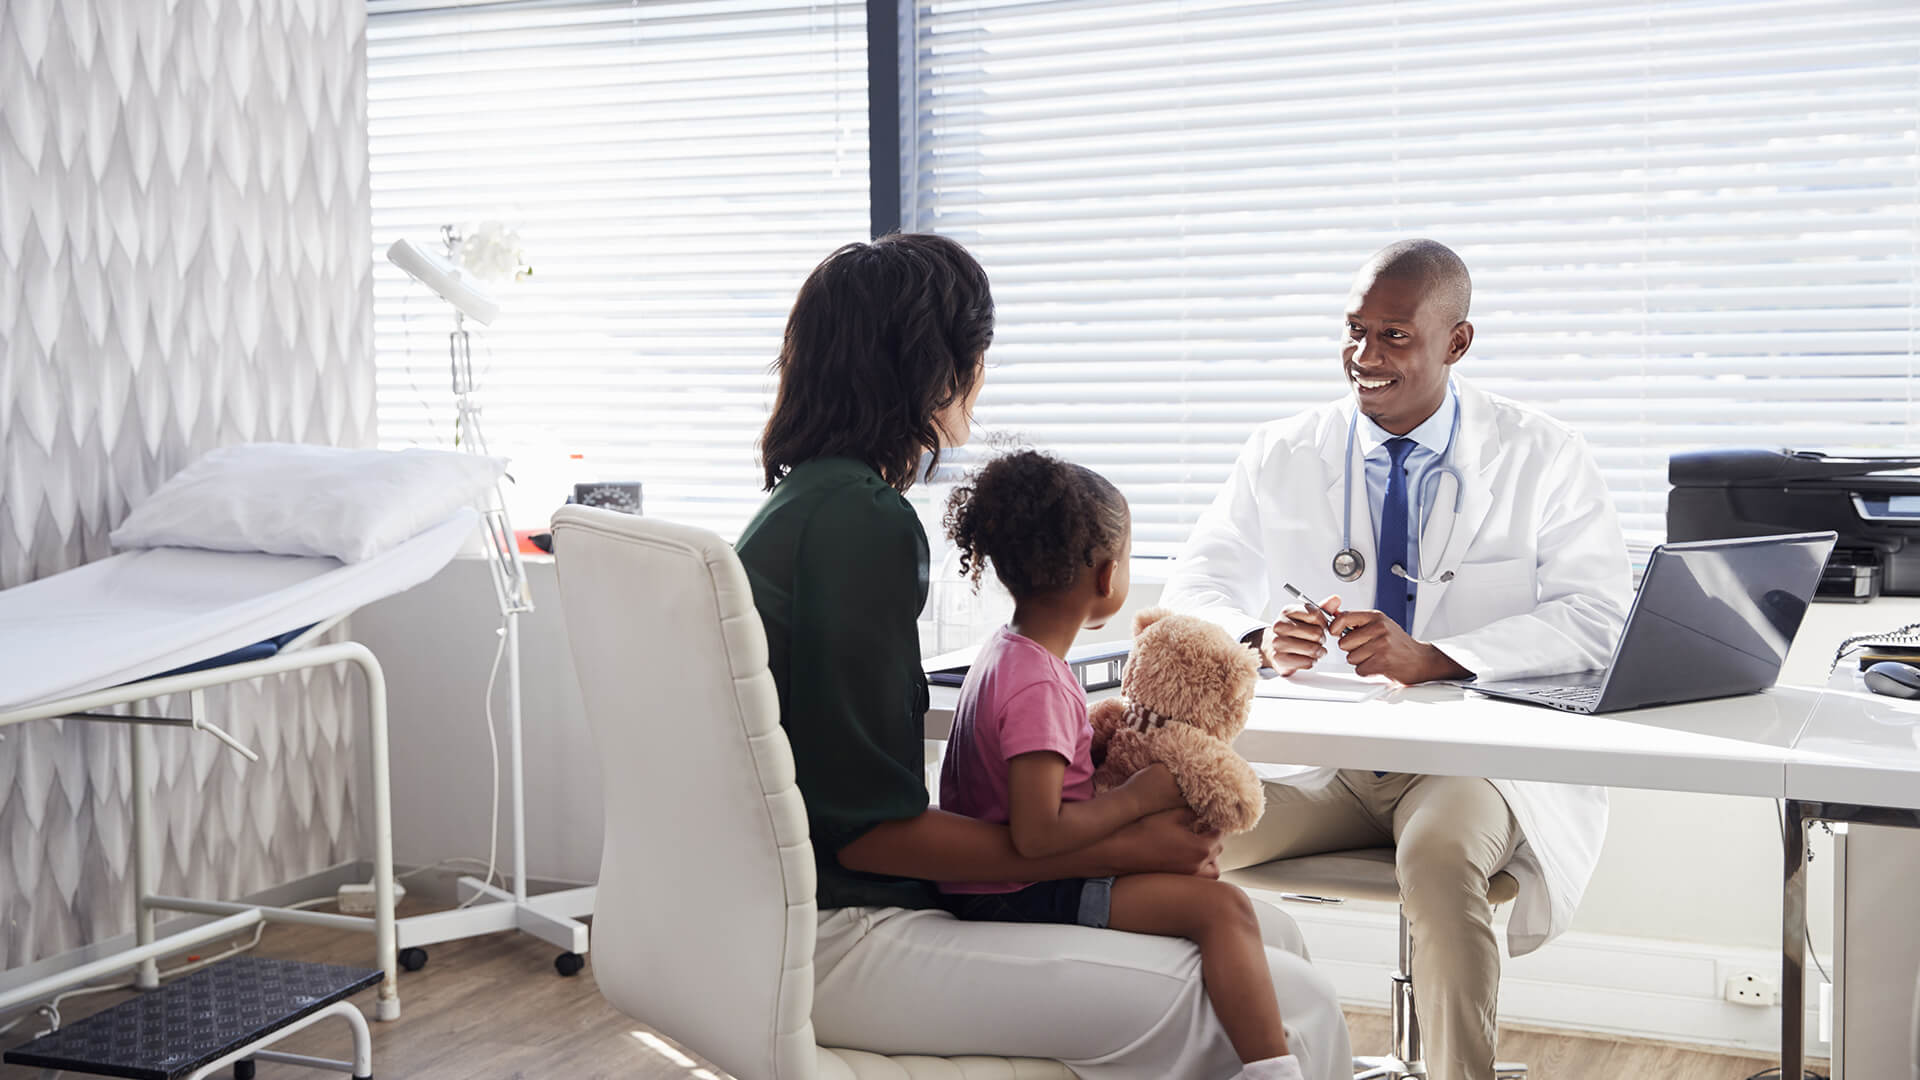 7 Ways to Attract New Patients to Your Doctor’s Office